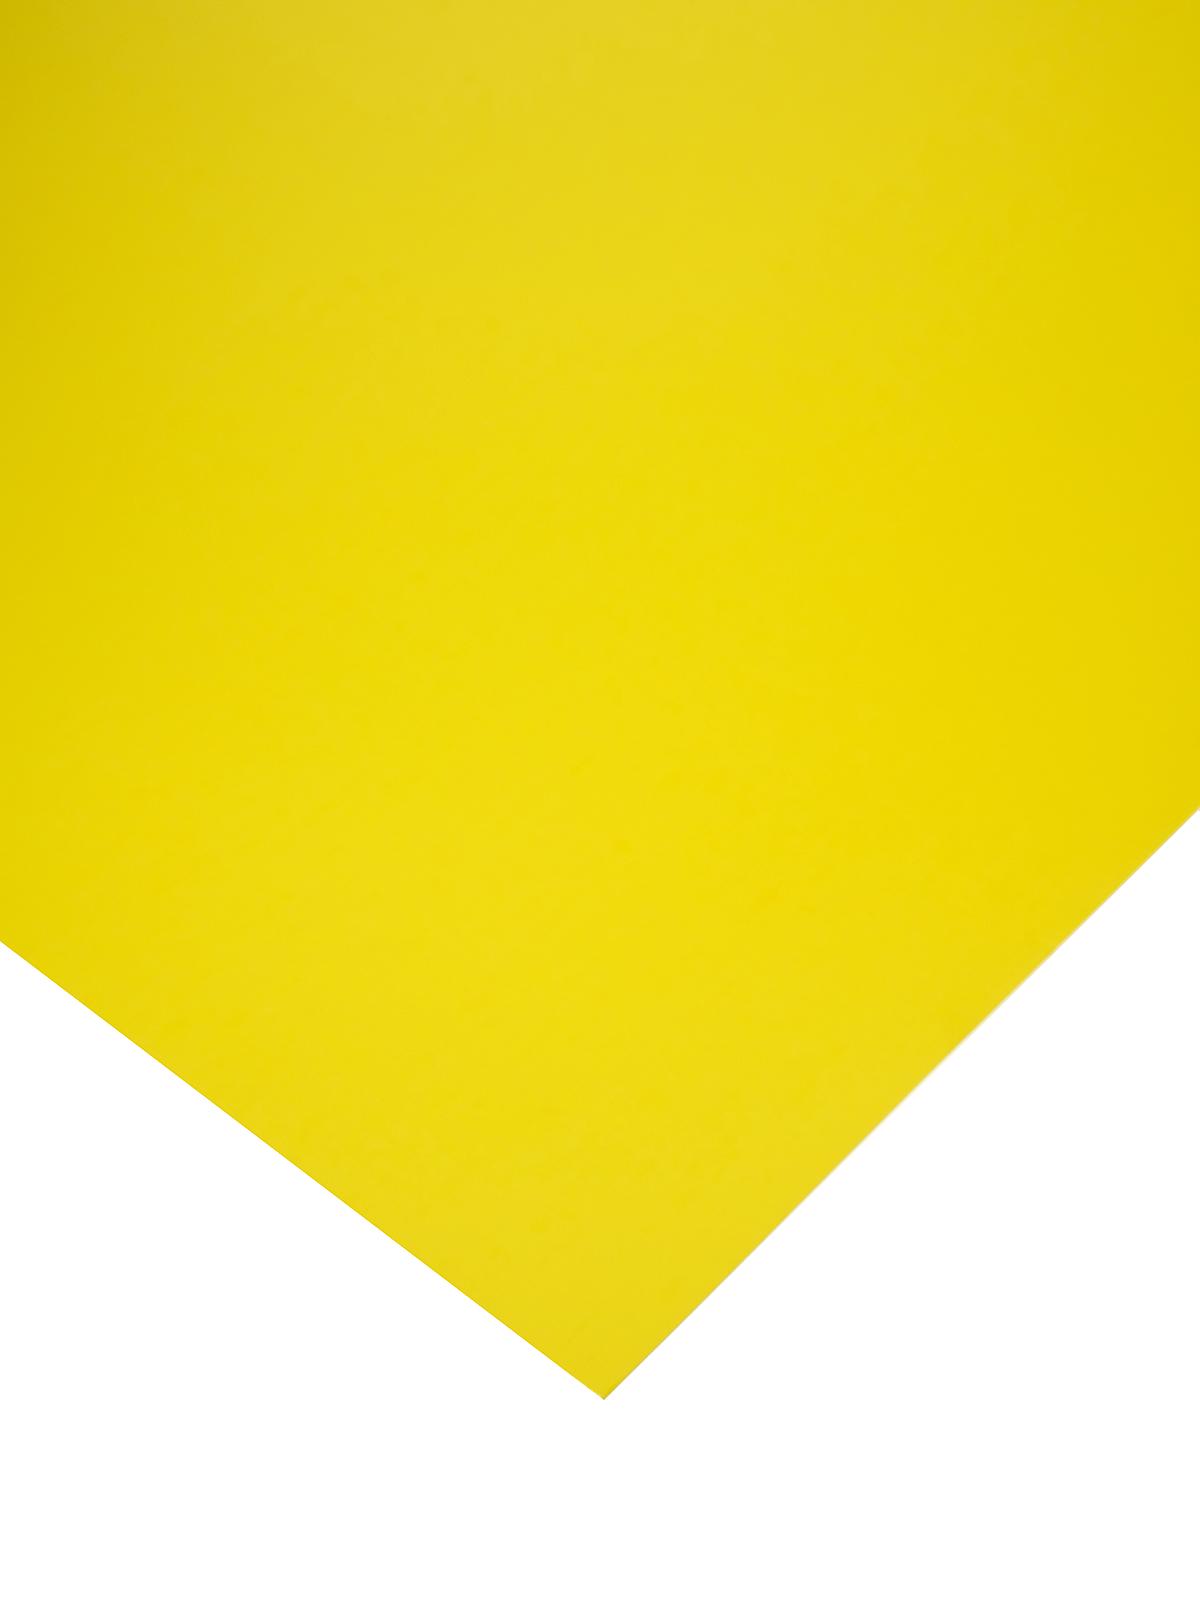 The Heavy Poster Board Yellow